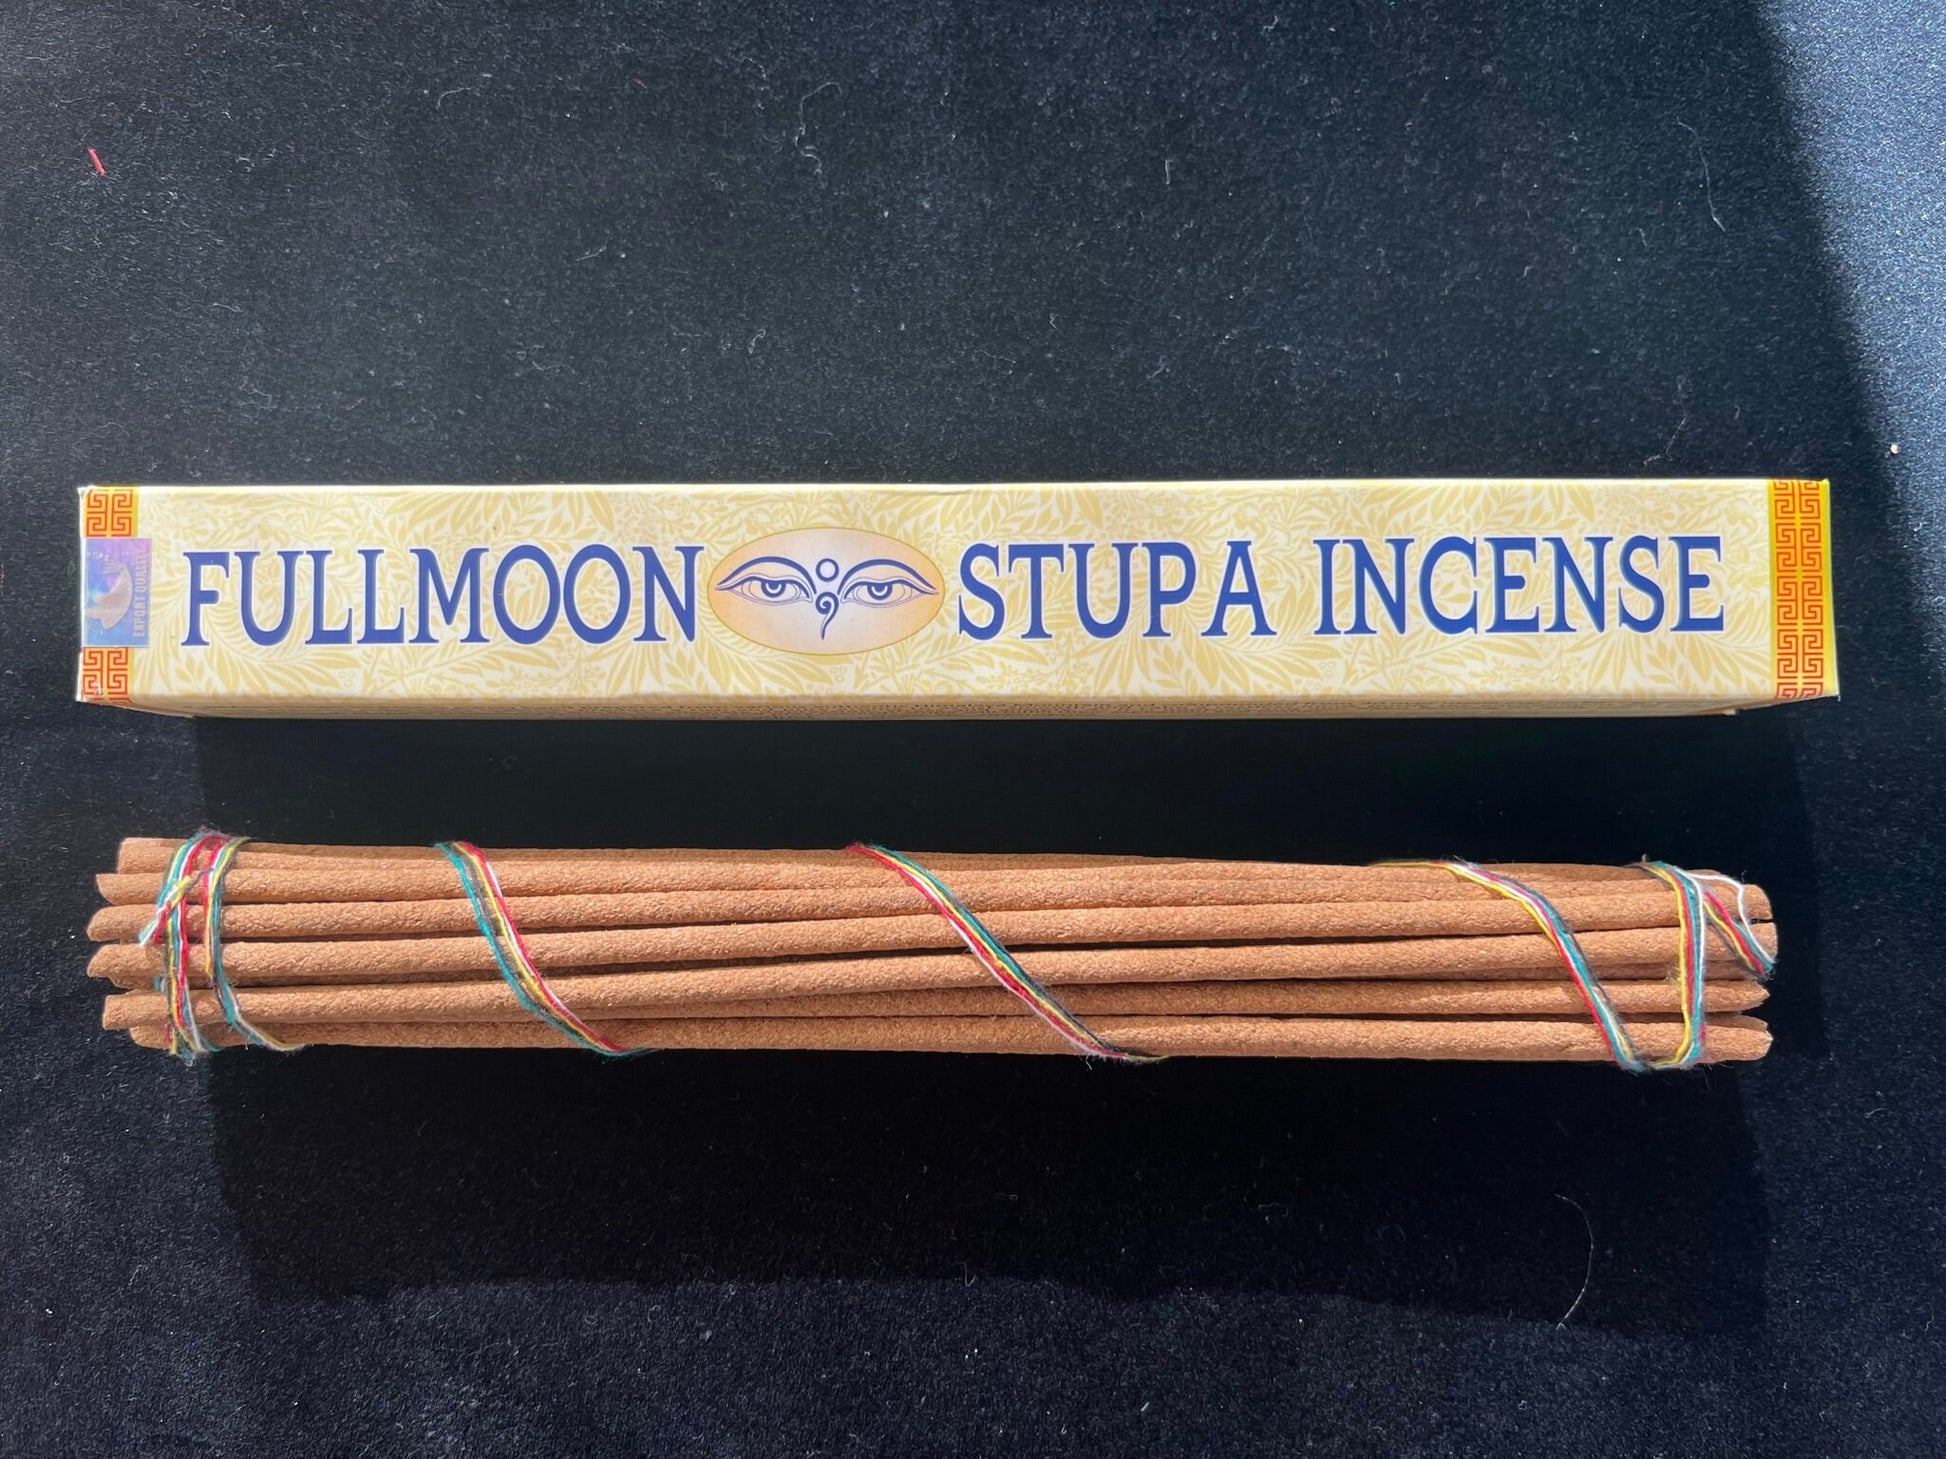 Full Moon Stupa Incense | Tibetan Incense | Lapchi Nesang Product | Made in Nepal | Approx 30 sticks | 8 inches long